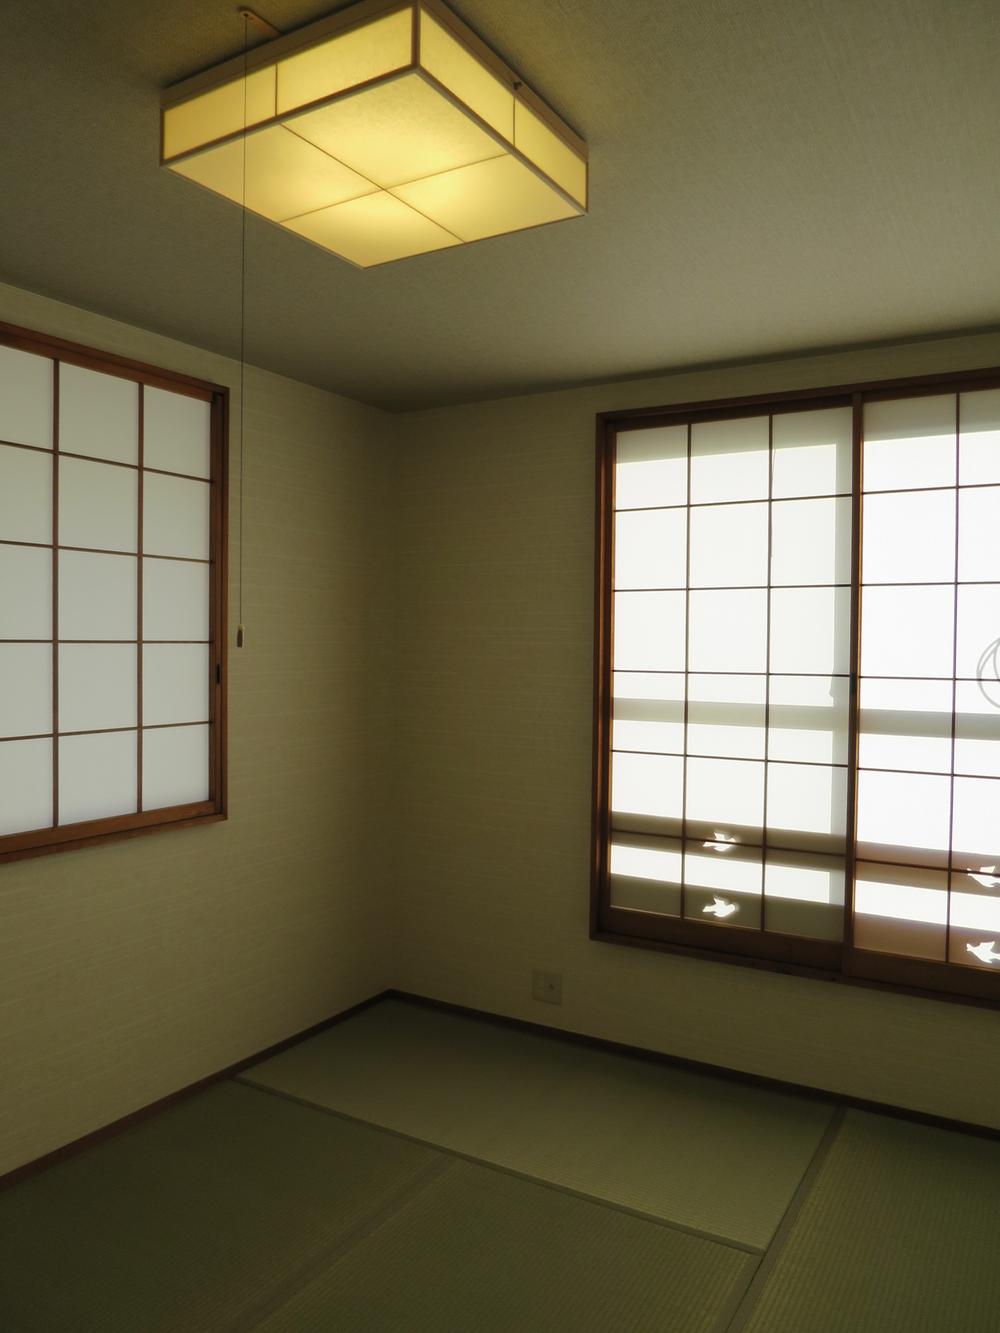 Non-living room. Your second floor of the Japanese-style room